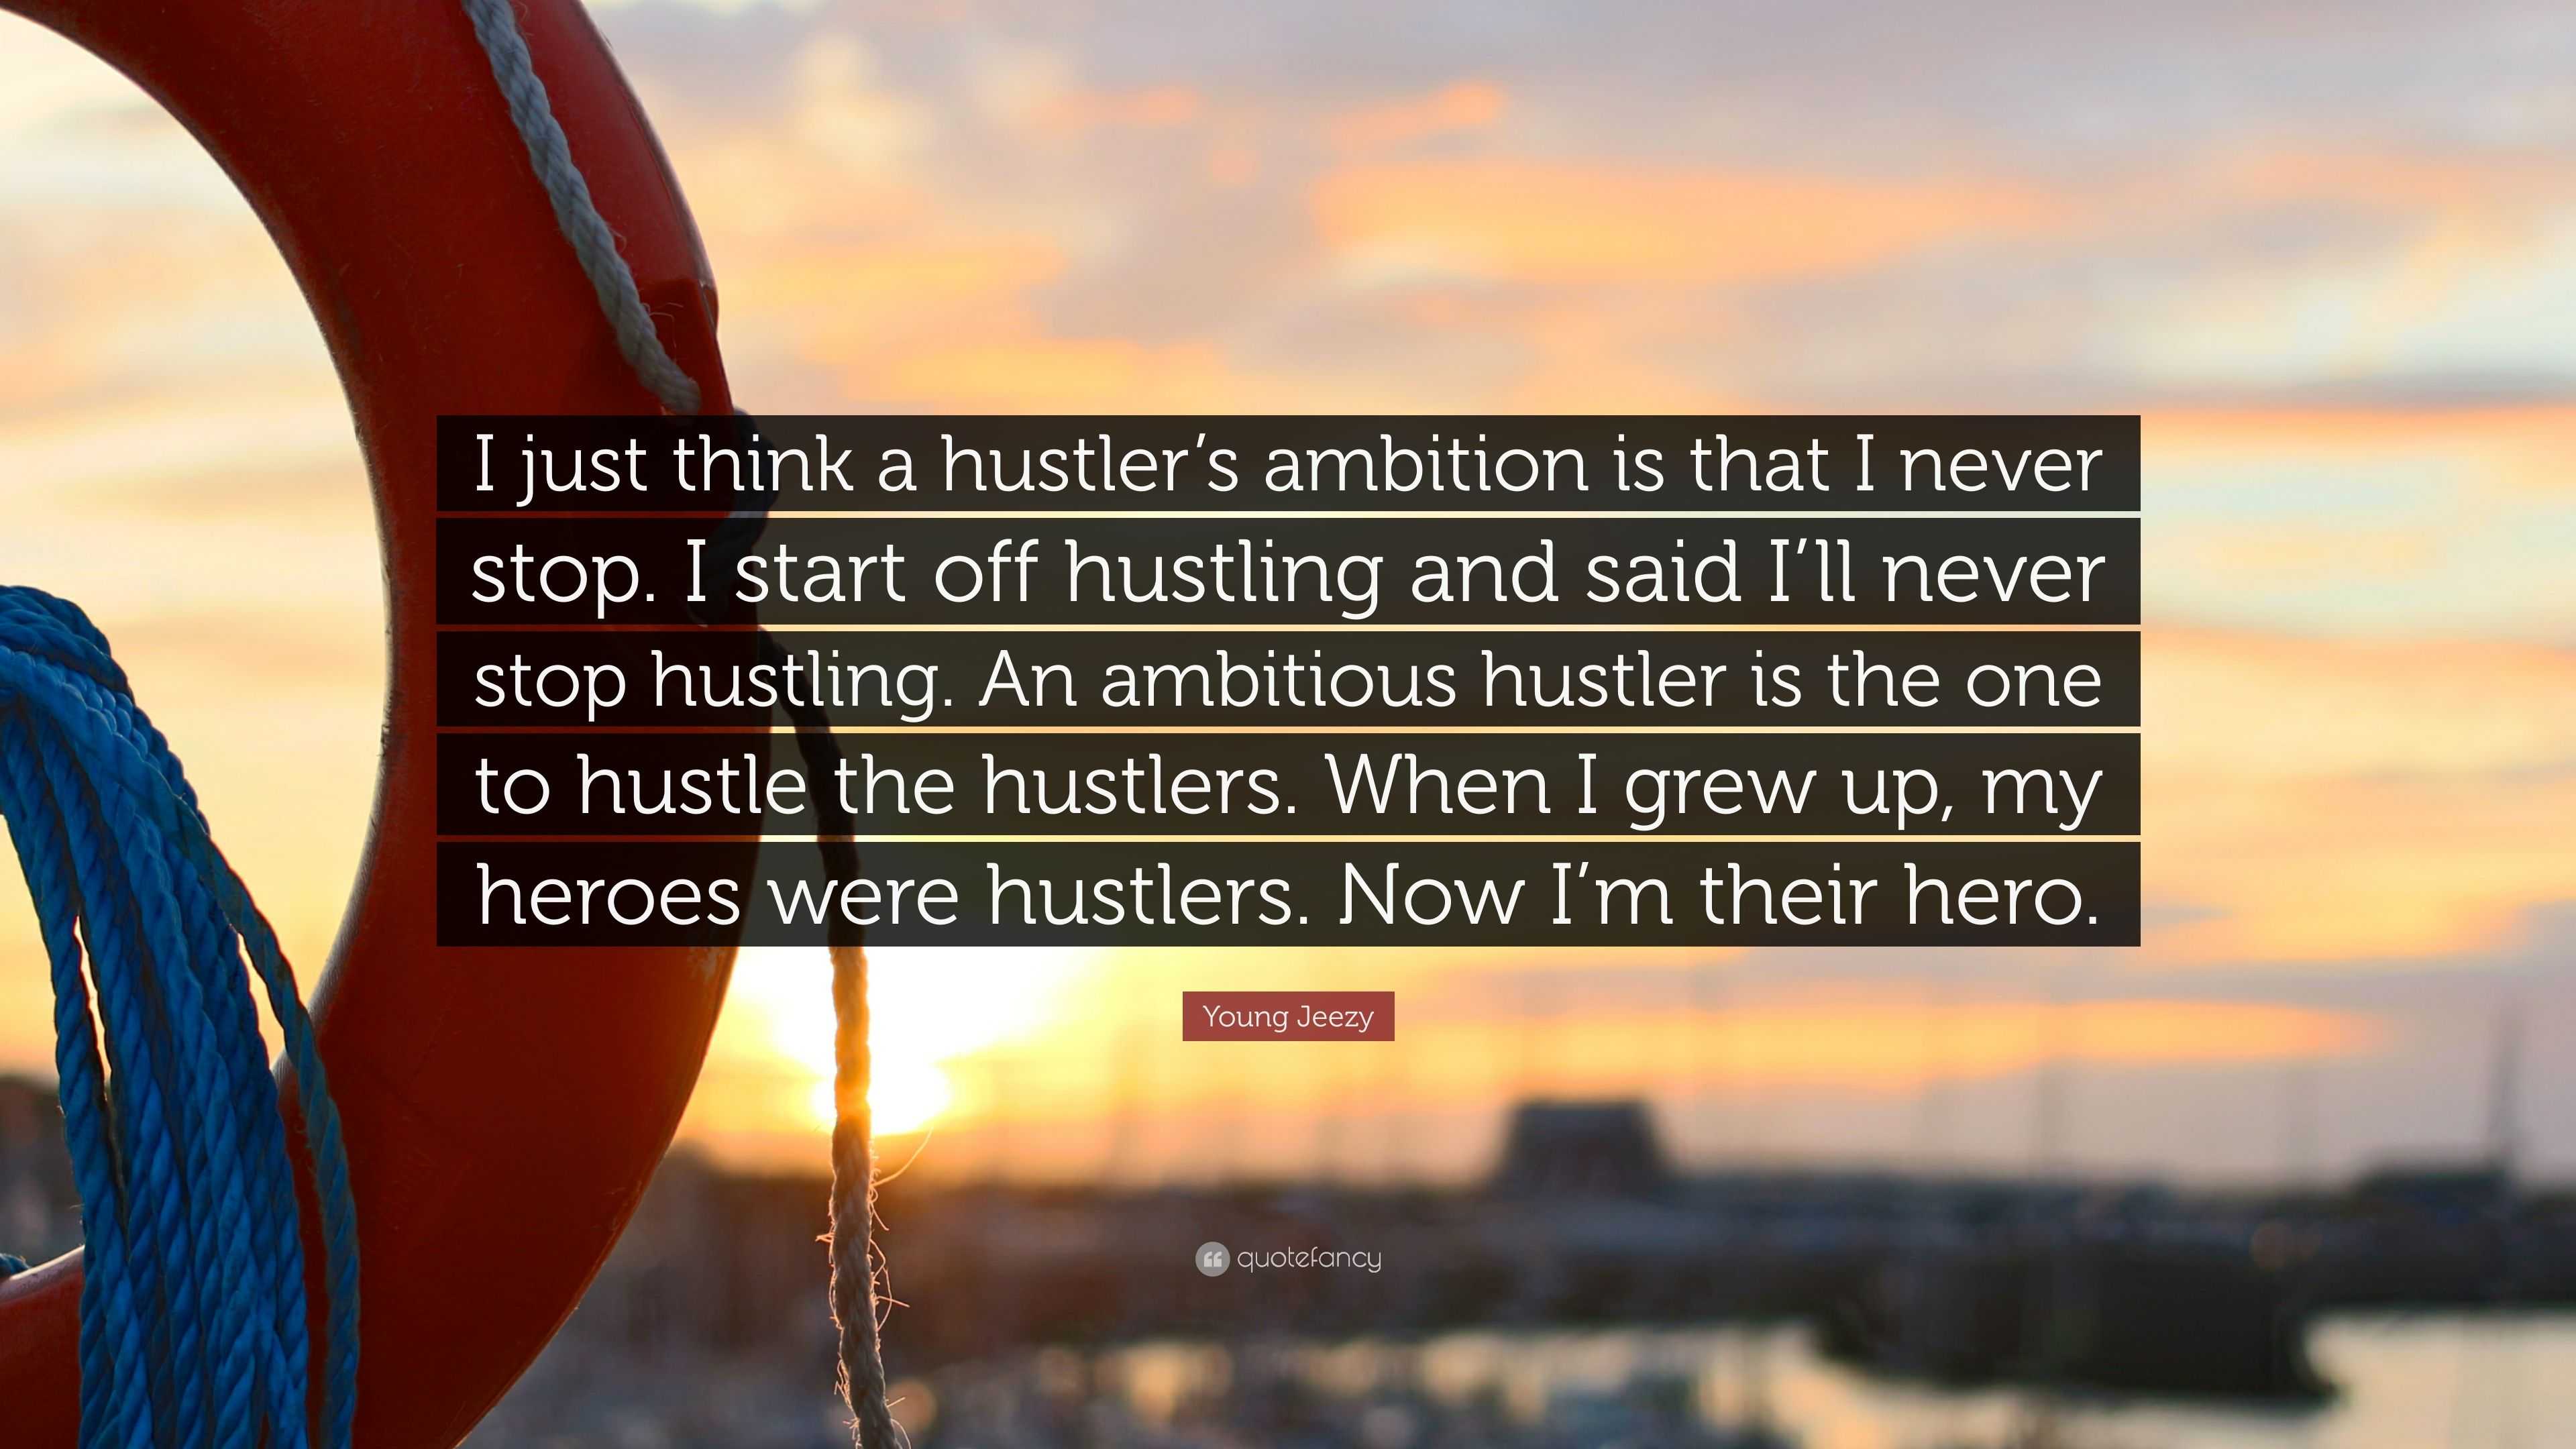 Young Jeezy Quote: “I just think a hustler’s ambition is that I never